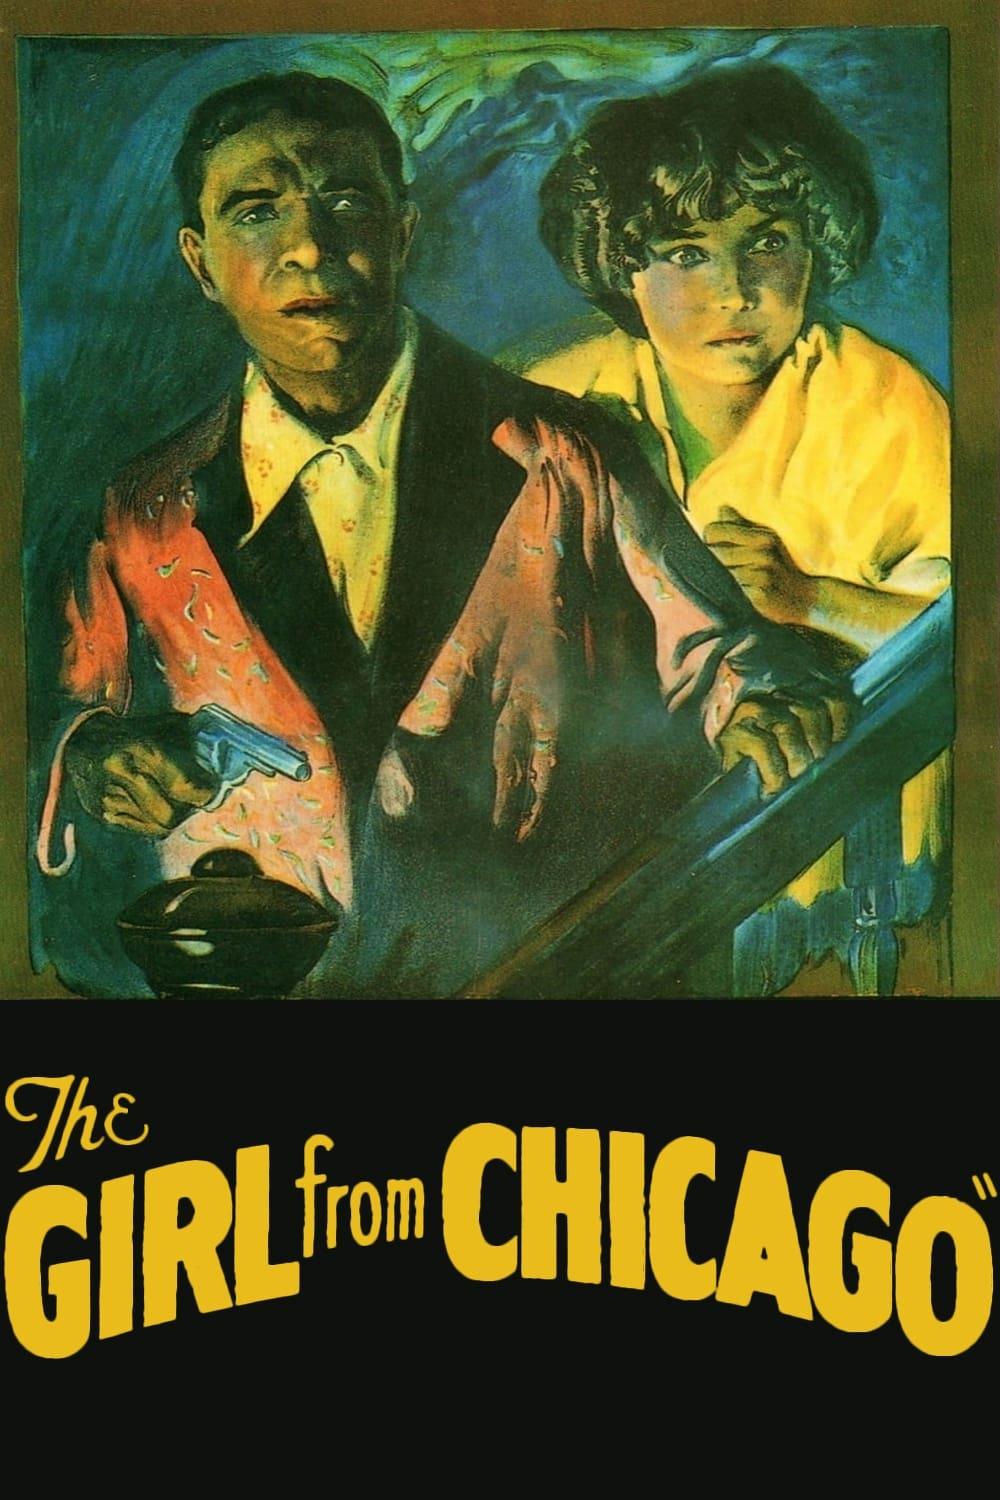 The Girl from Chicago poster